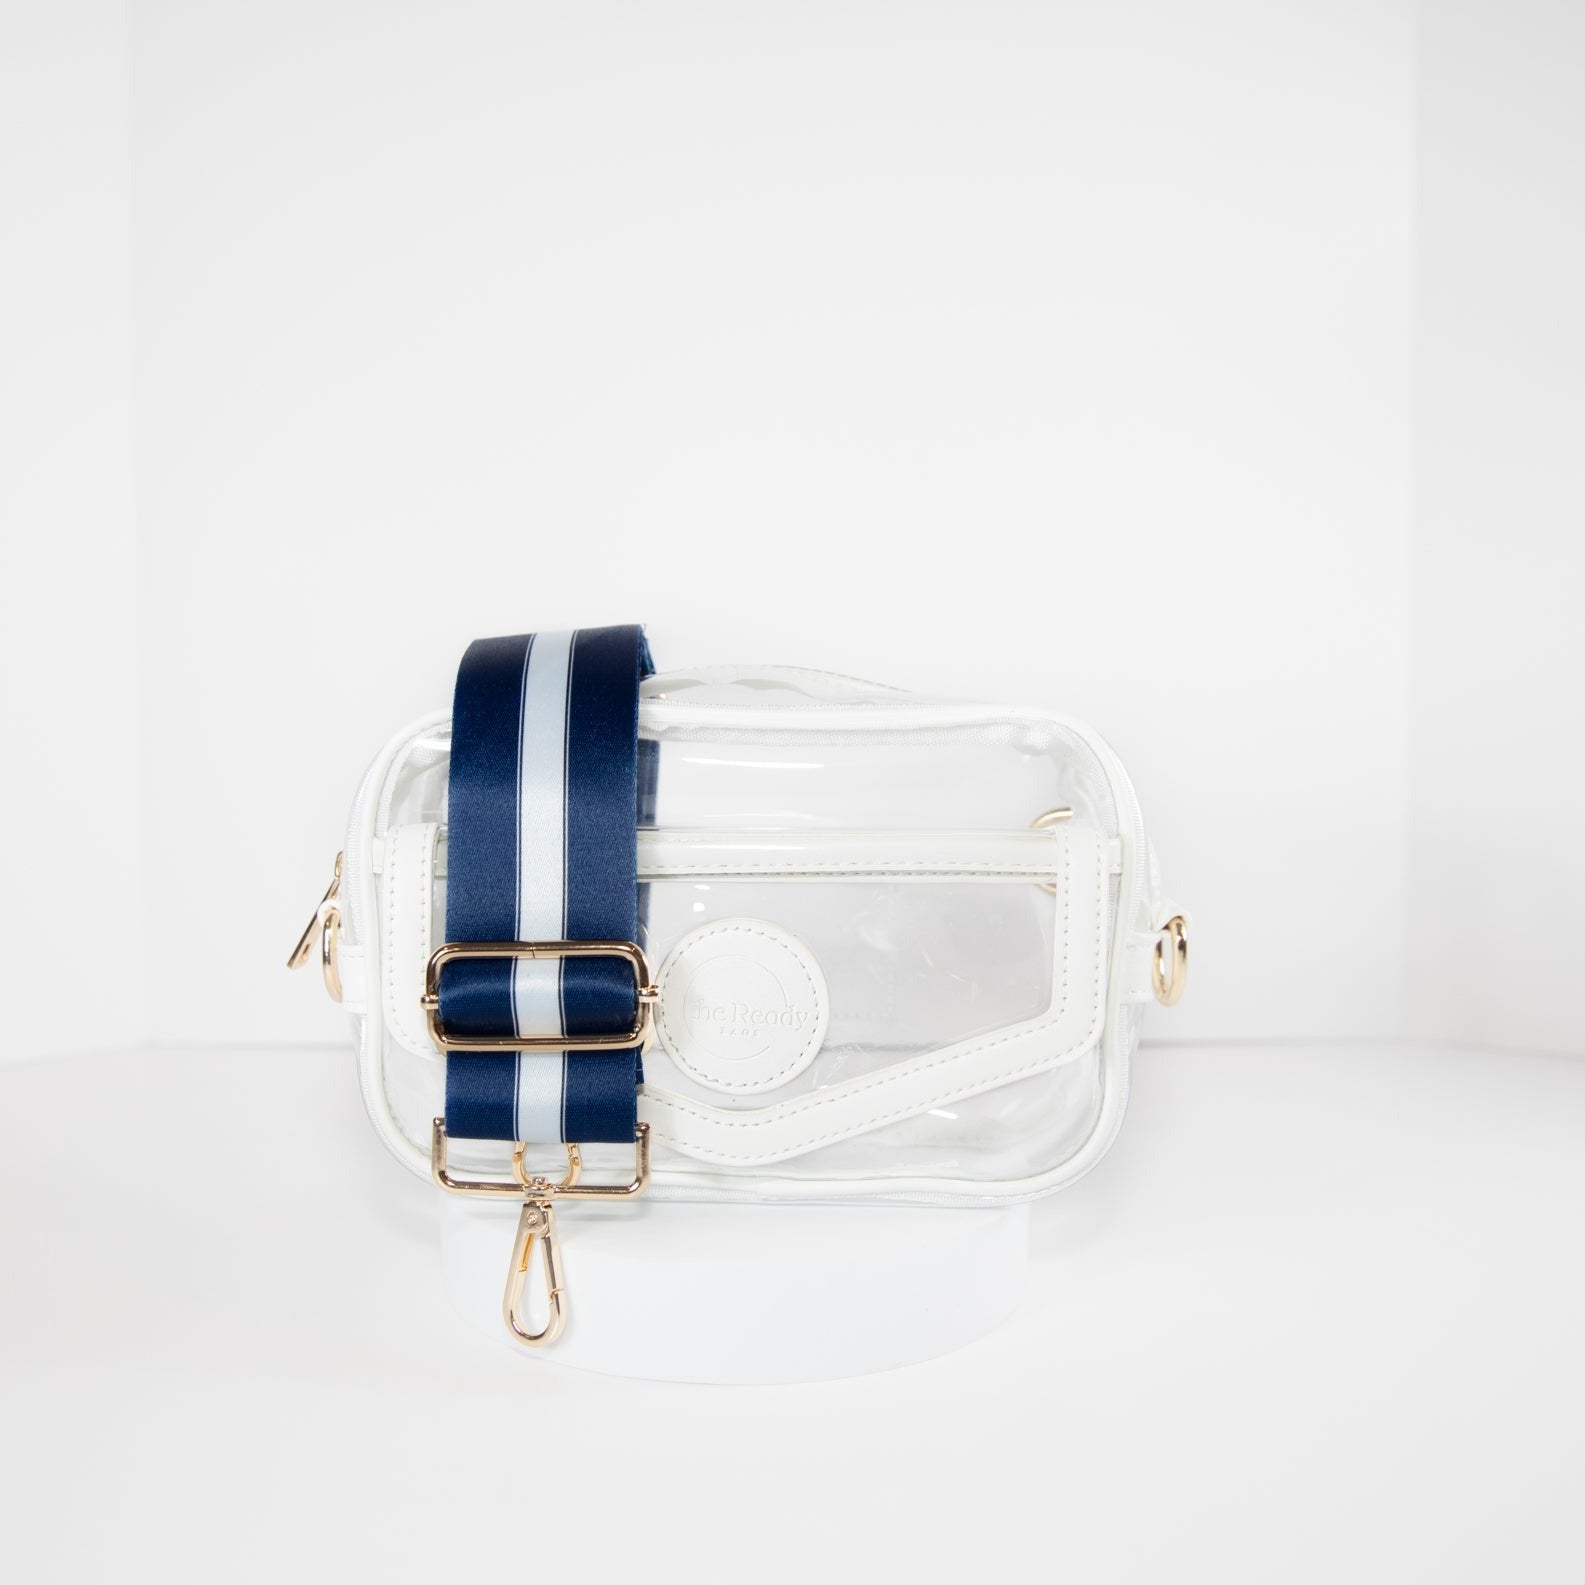 Clear stadium bag in white trim, front facing, with a crossbody strap in Penn State Nittany Lion colors.